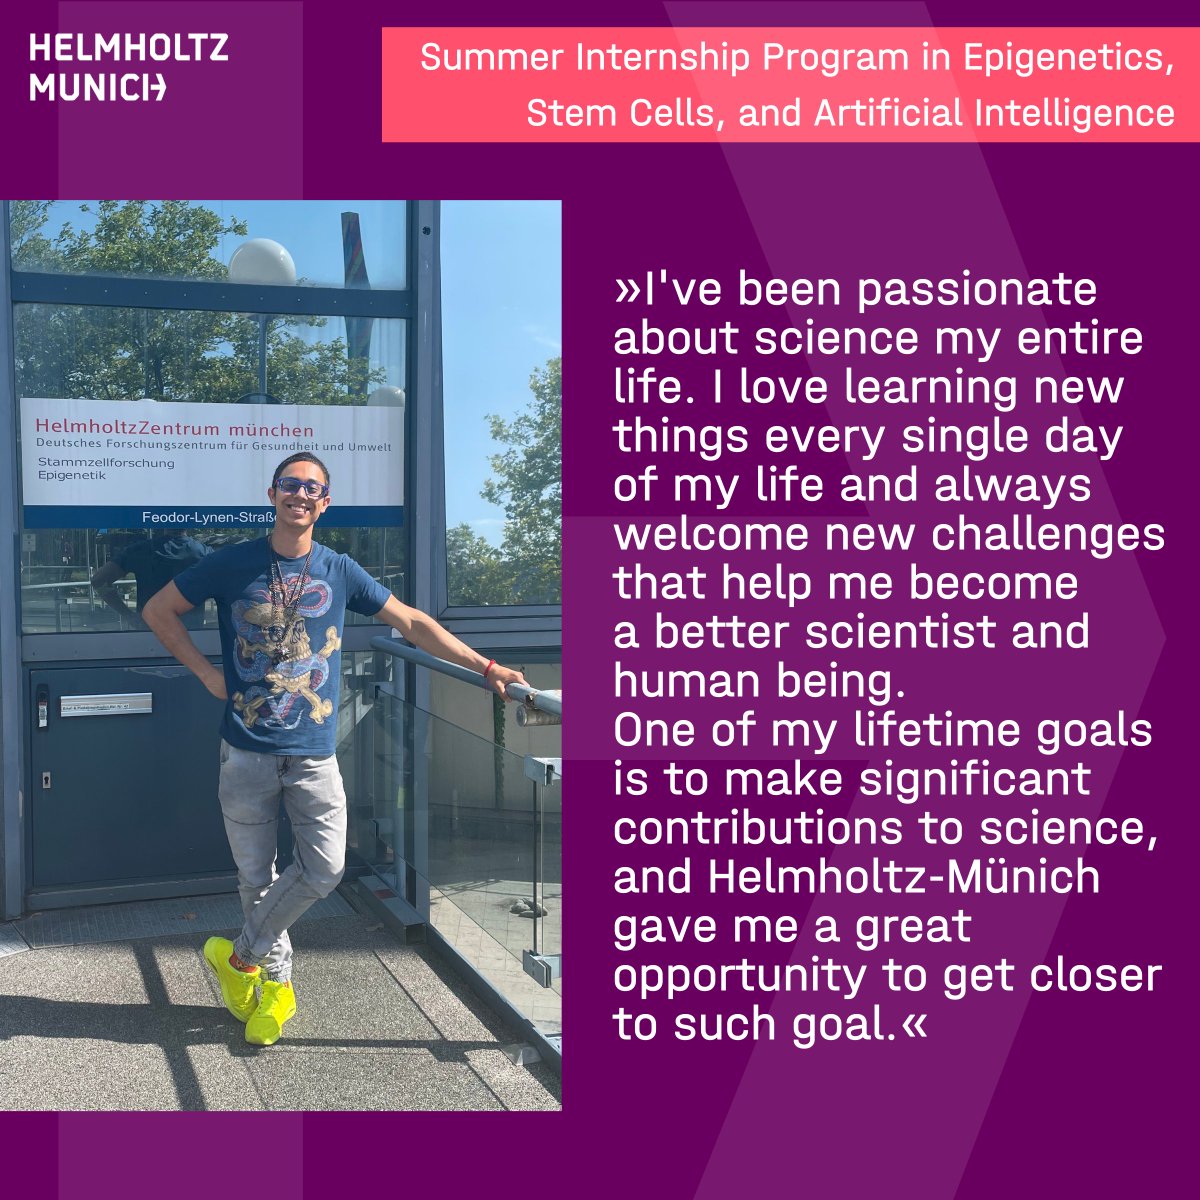 👋 Last week of our #SummerInternship, and Phabel @phabel2001 is making it count! 🌟 Working alongside Gabriele in @anto_scial lab @HelmholtzMunich, Phabel is certain: this is 'a summer I'll never forget!!!' 🚀 Take a peek below to see why! 📸 #science #epigenetics #ai #stemcell